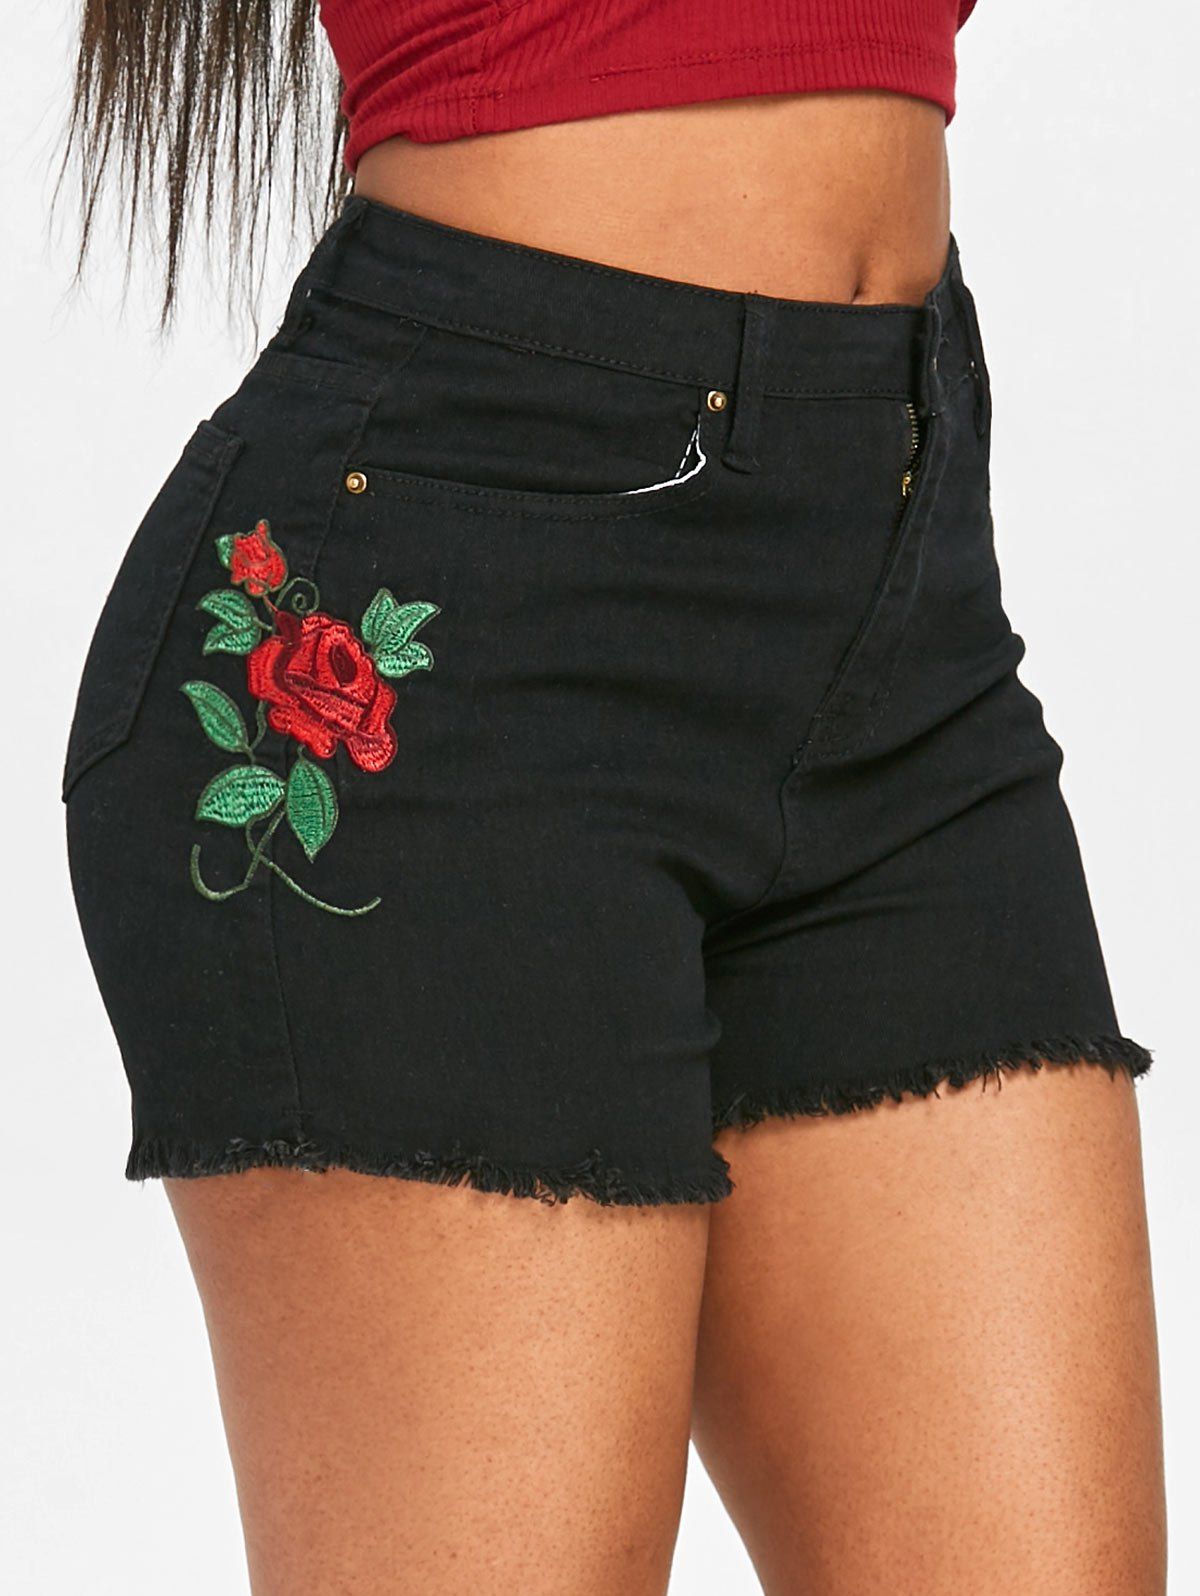 Fancy High Waisted Floral Embroidery Jean Shorts  